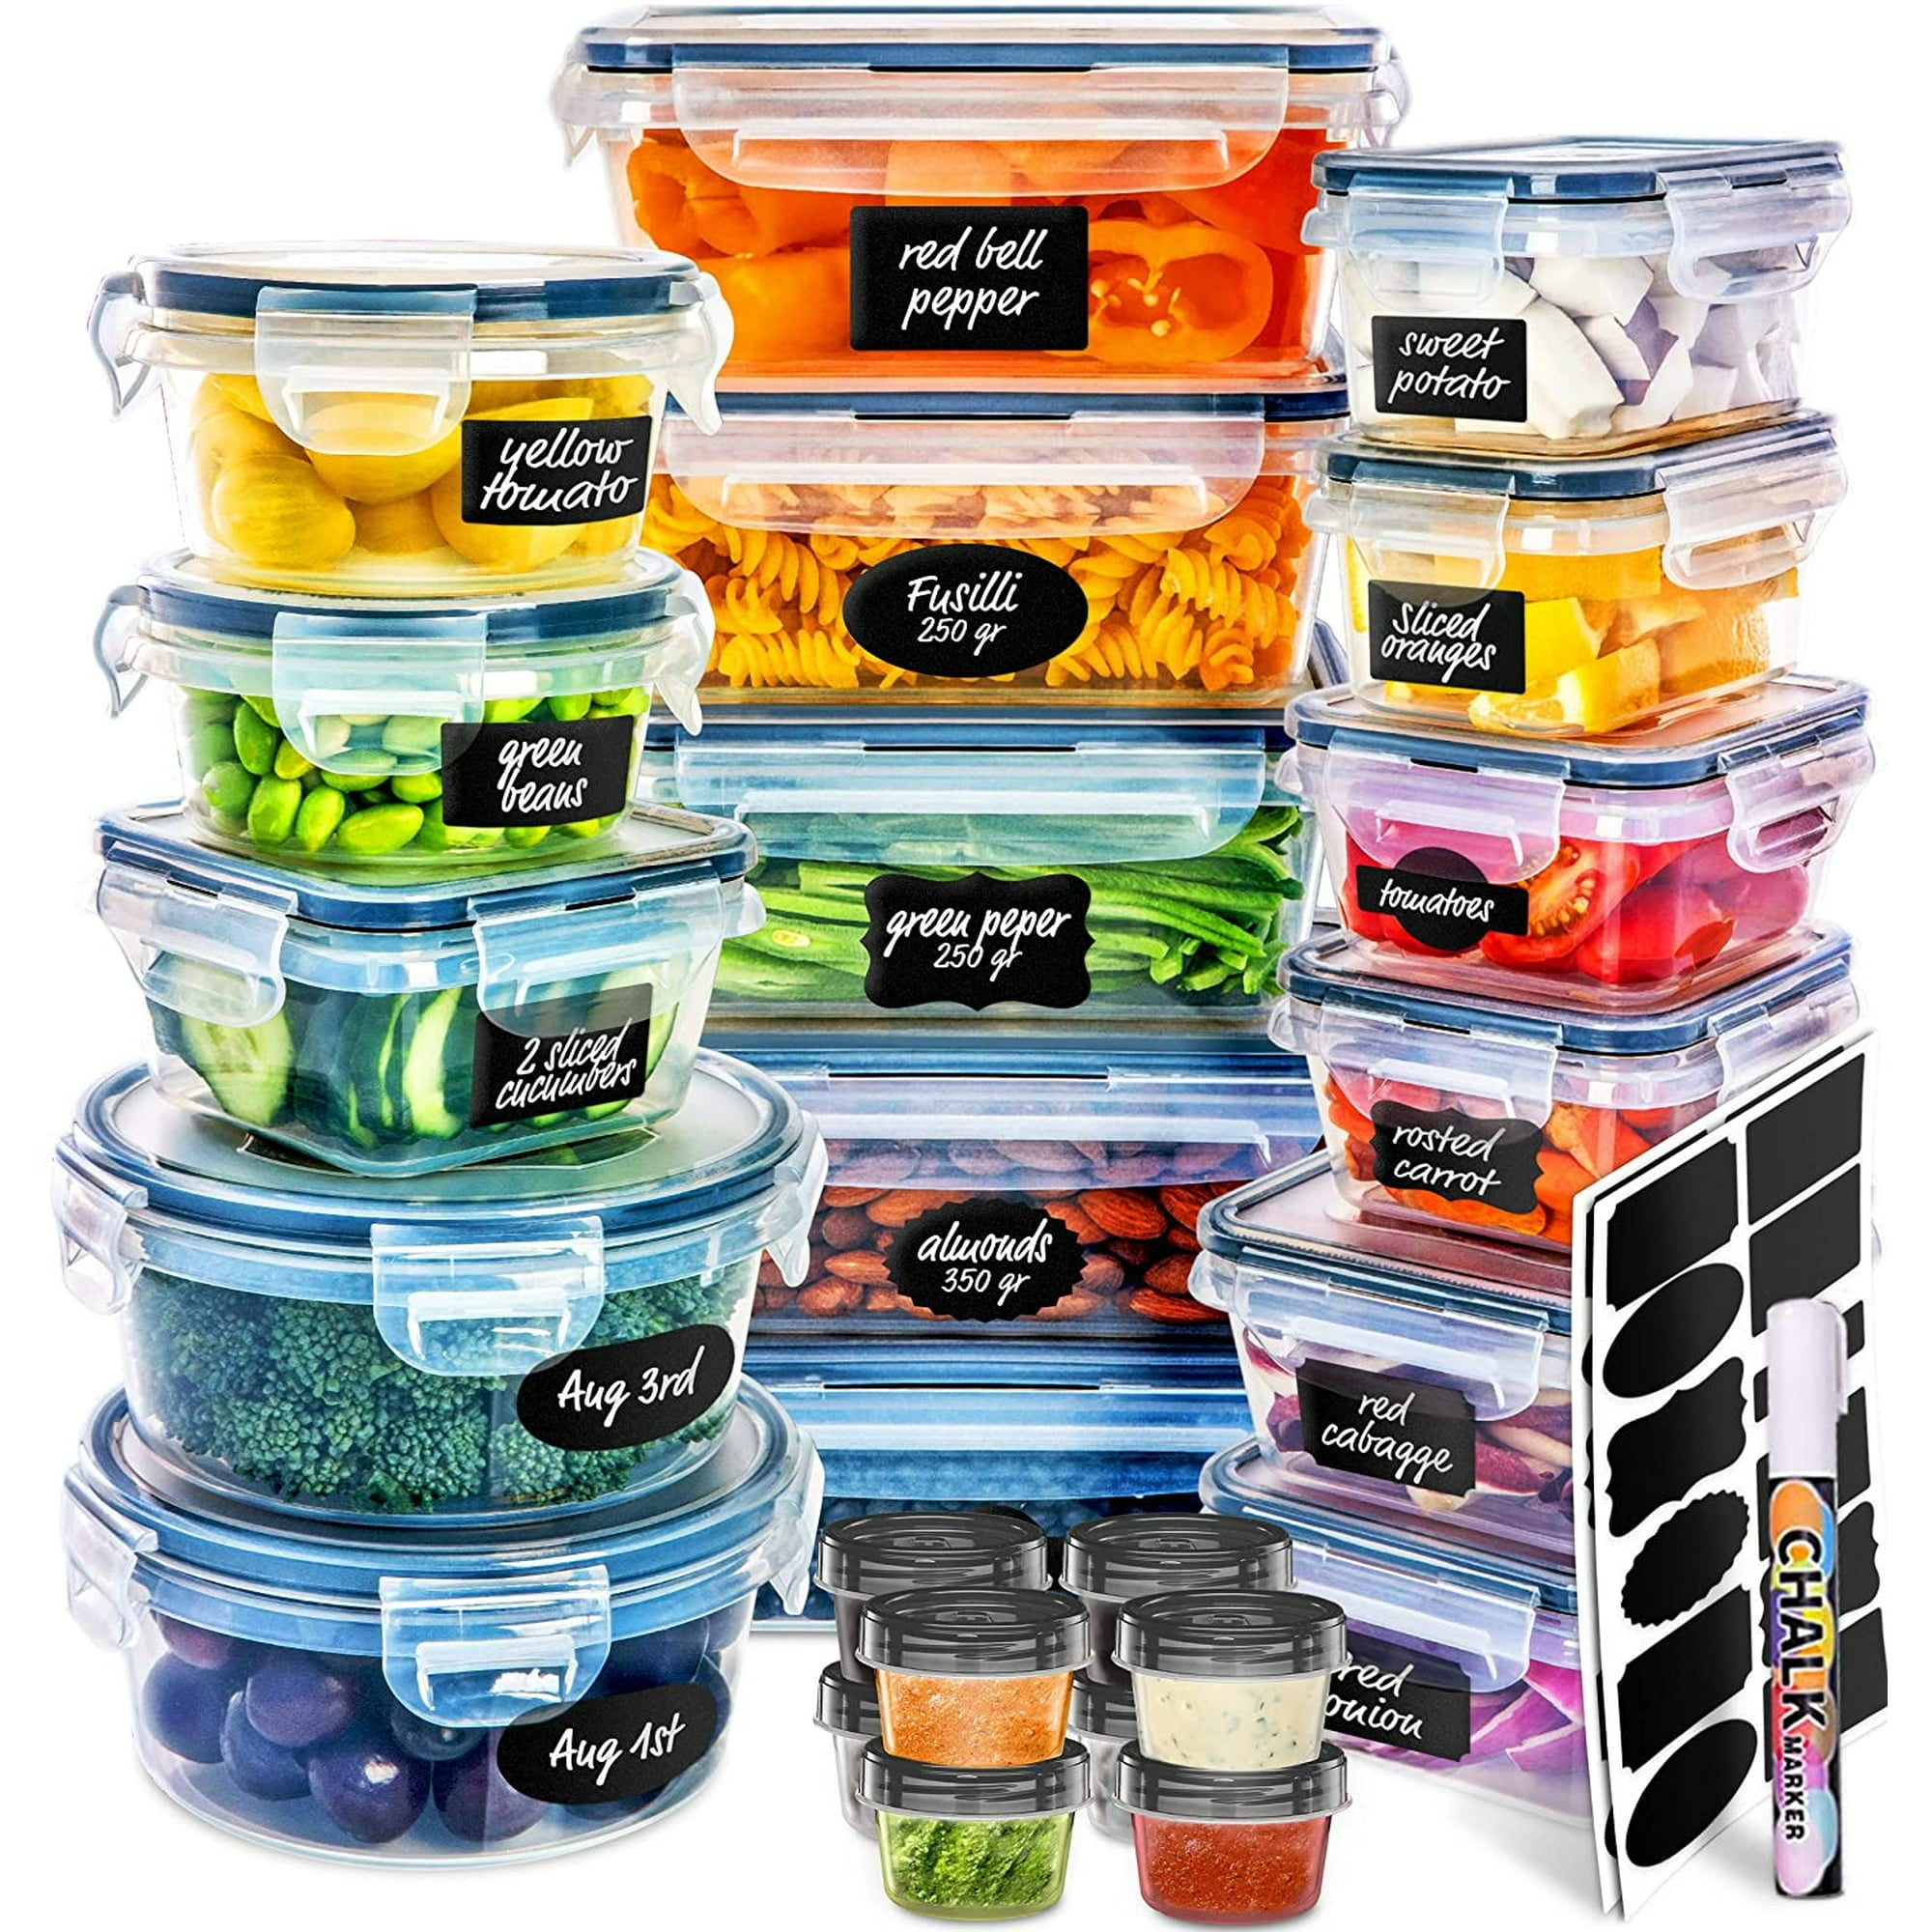 https://ak1.ostkcdn.com/images/products/is/images/direct/9ddaa69937743e87e972d4a5542ea9a65991940a/50-piece-set-of-food-storage-containers.jpg